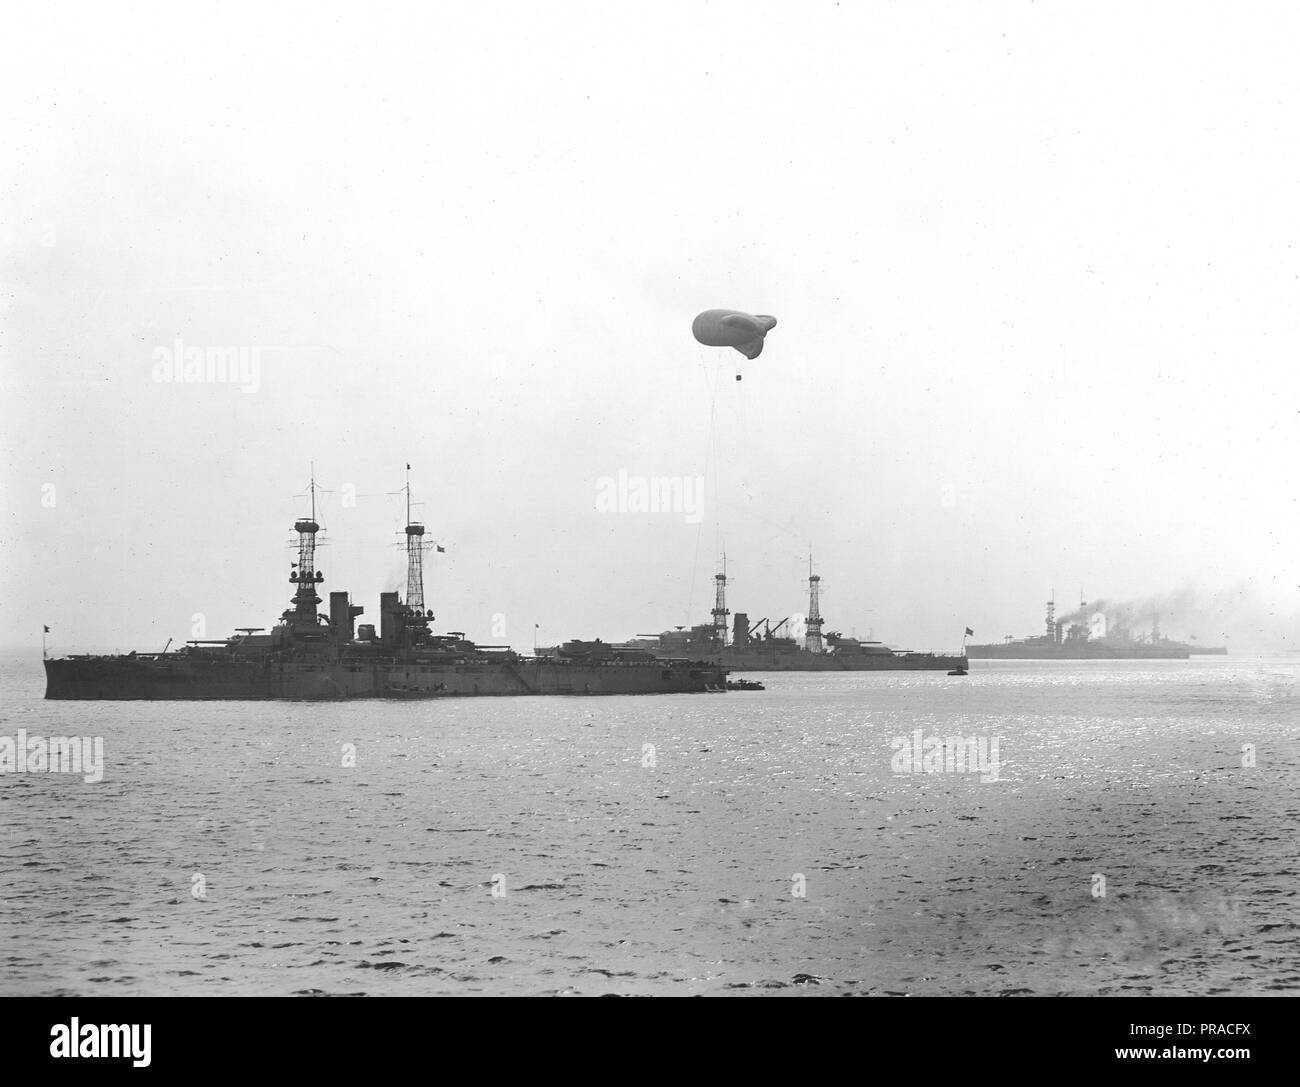 flights-with-ships-in-view-view-of-fleet